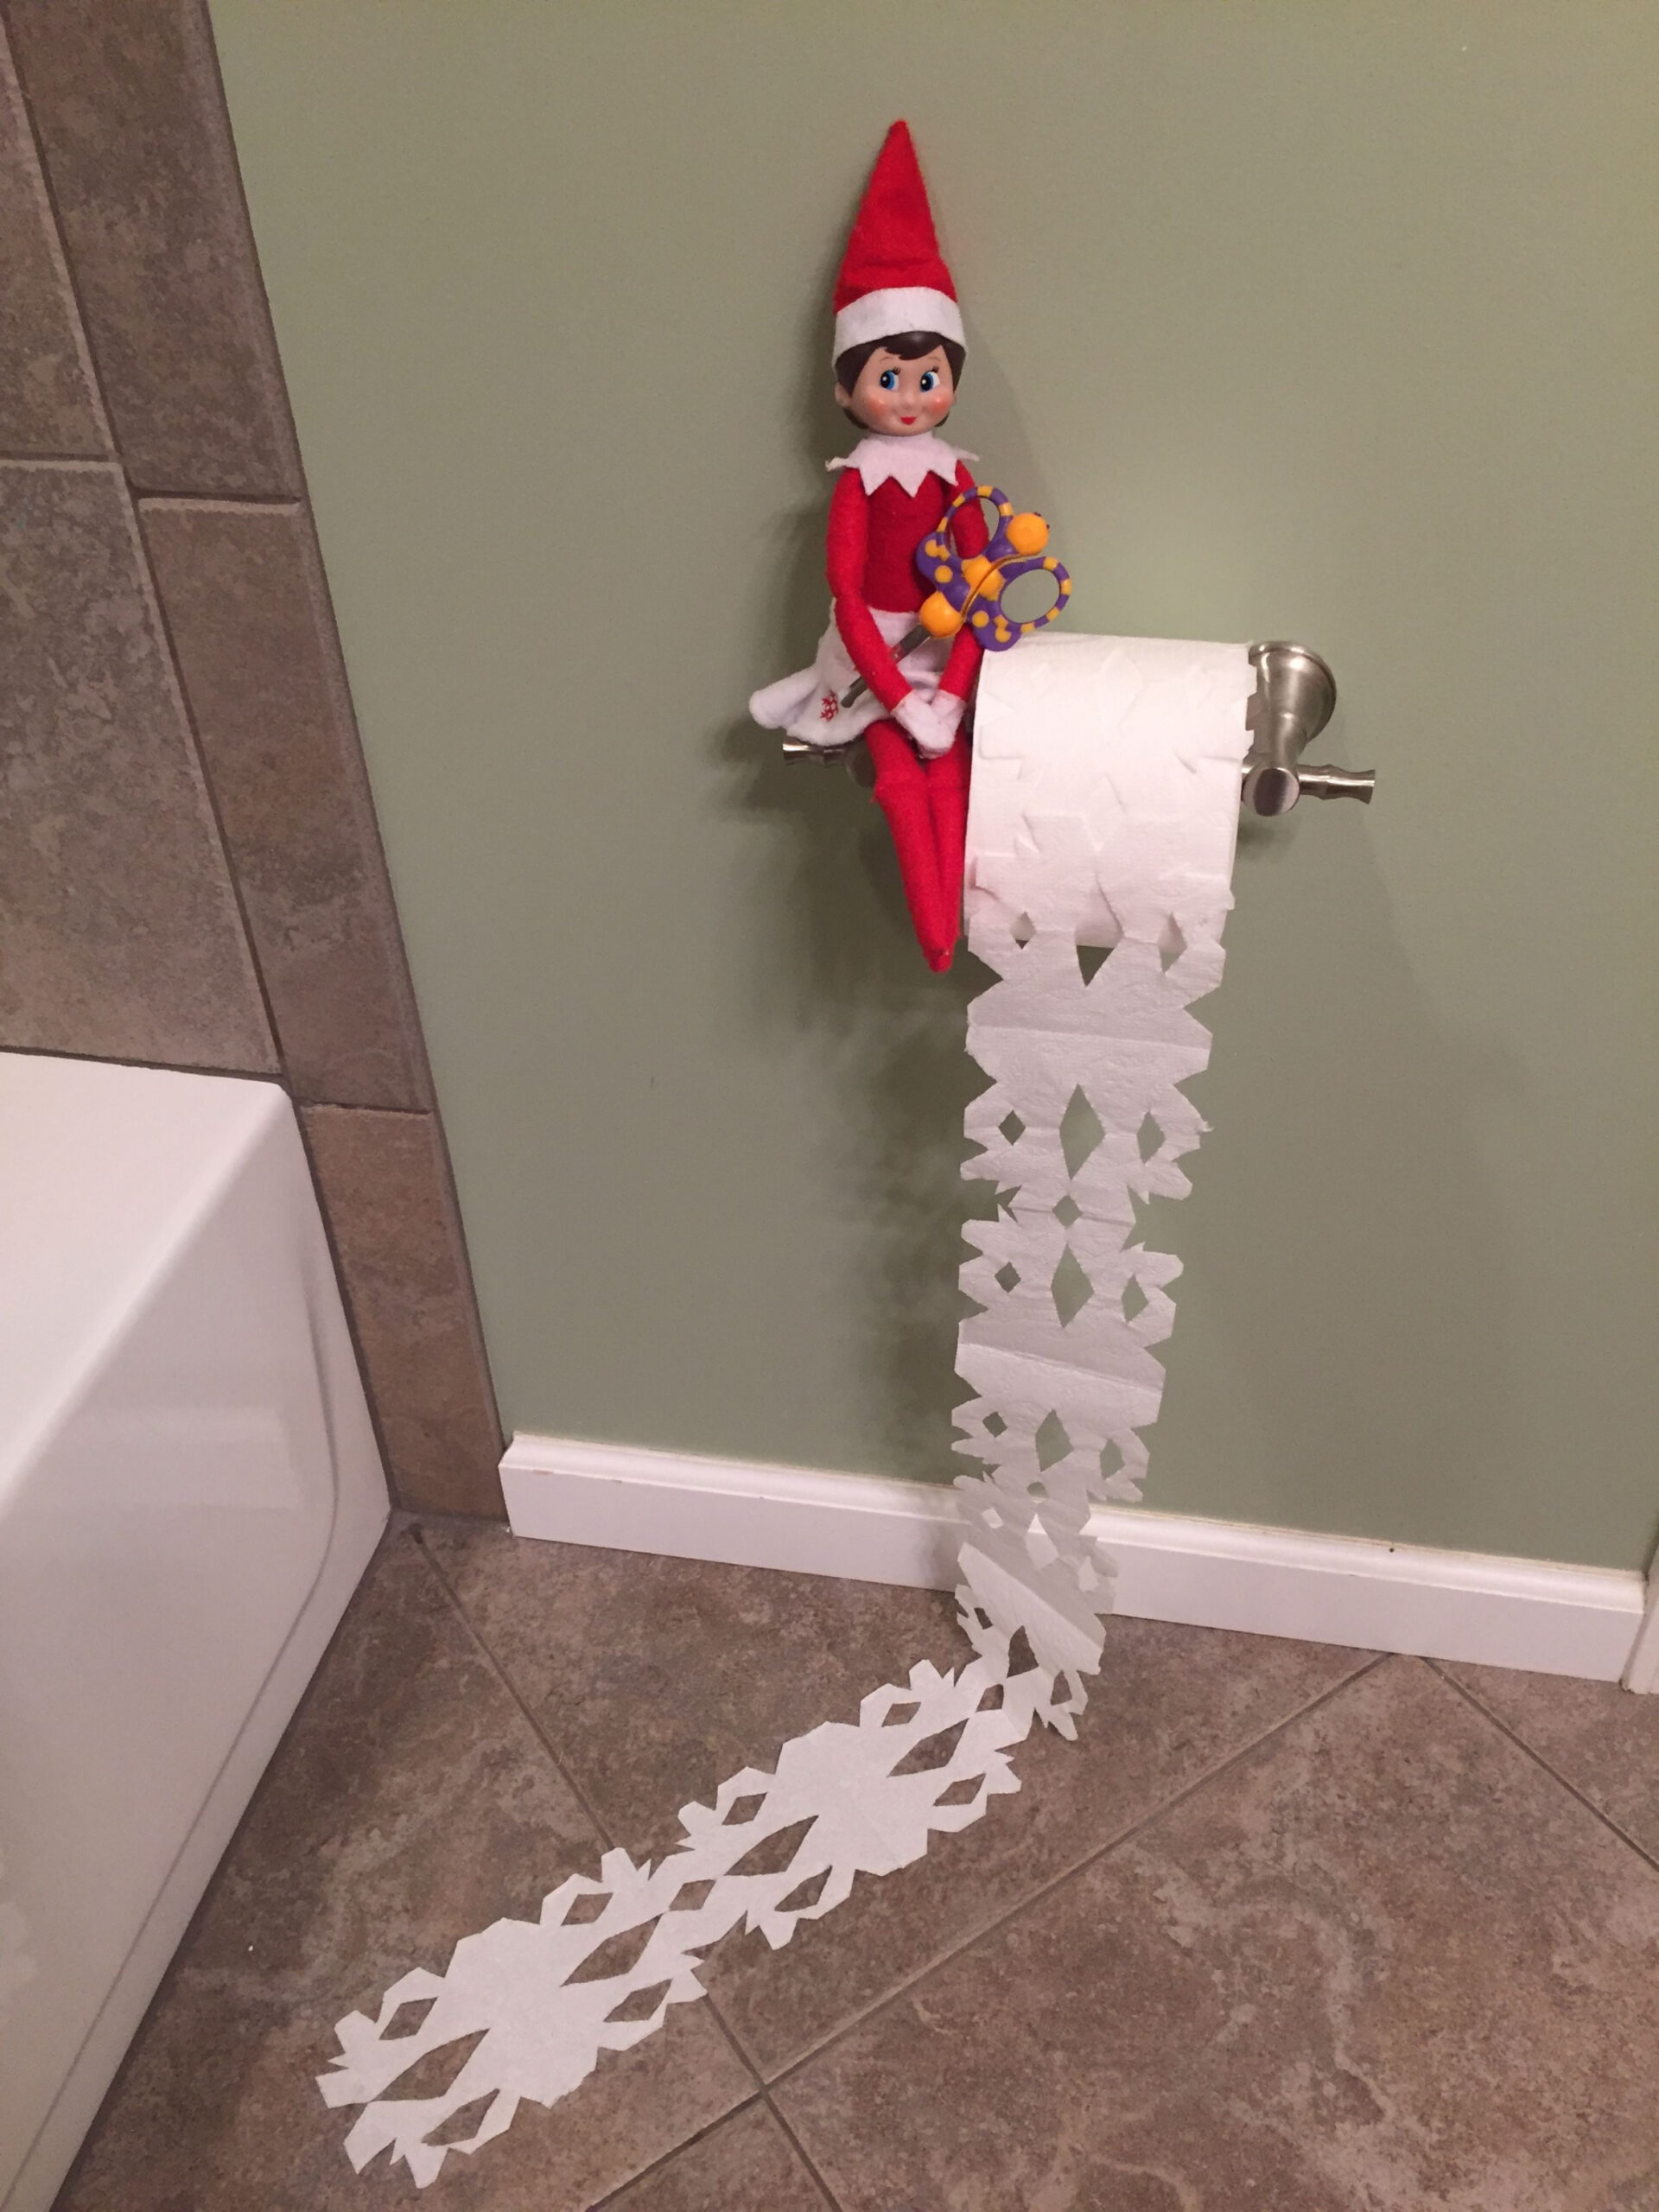 Elf on the shelf day !! Jingle Bell made toilet paper snowflakes